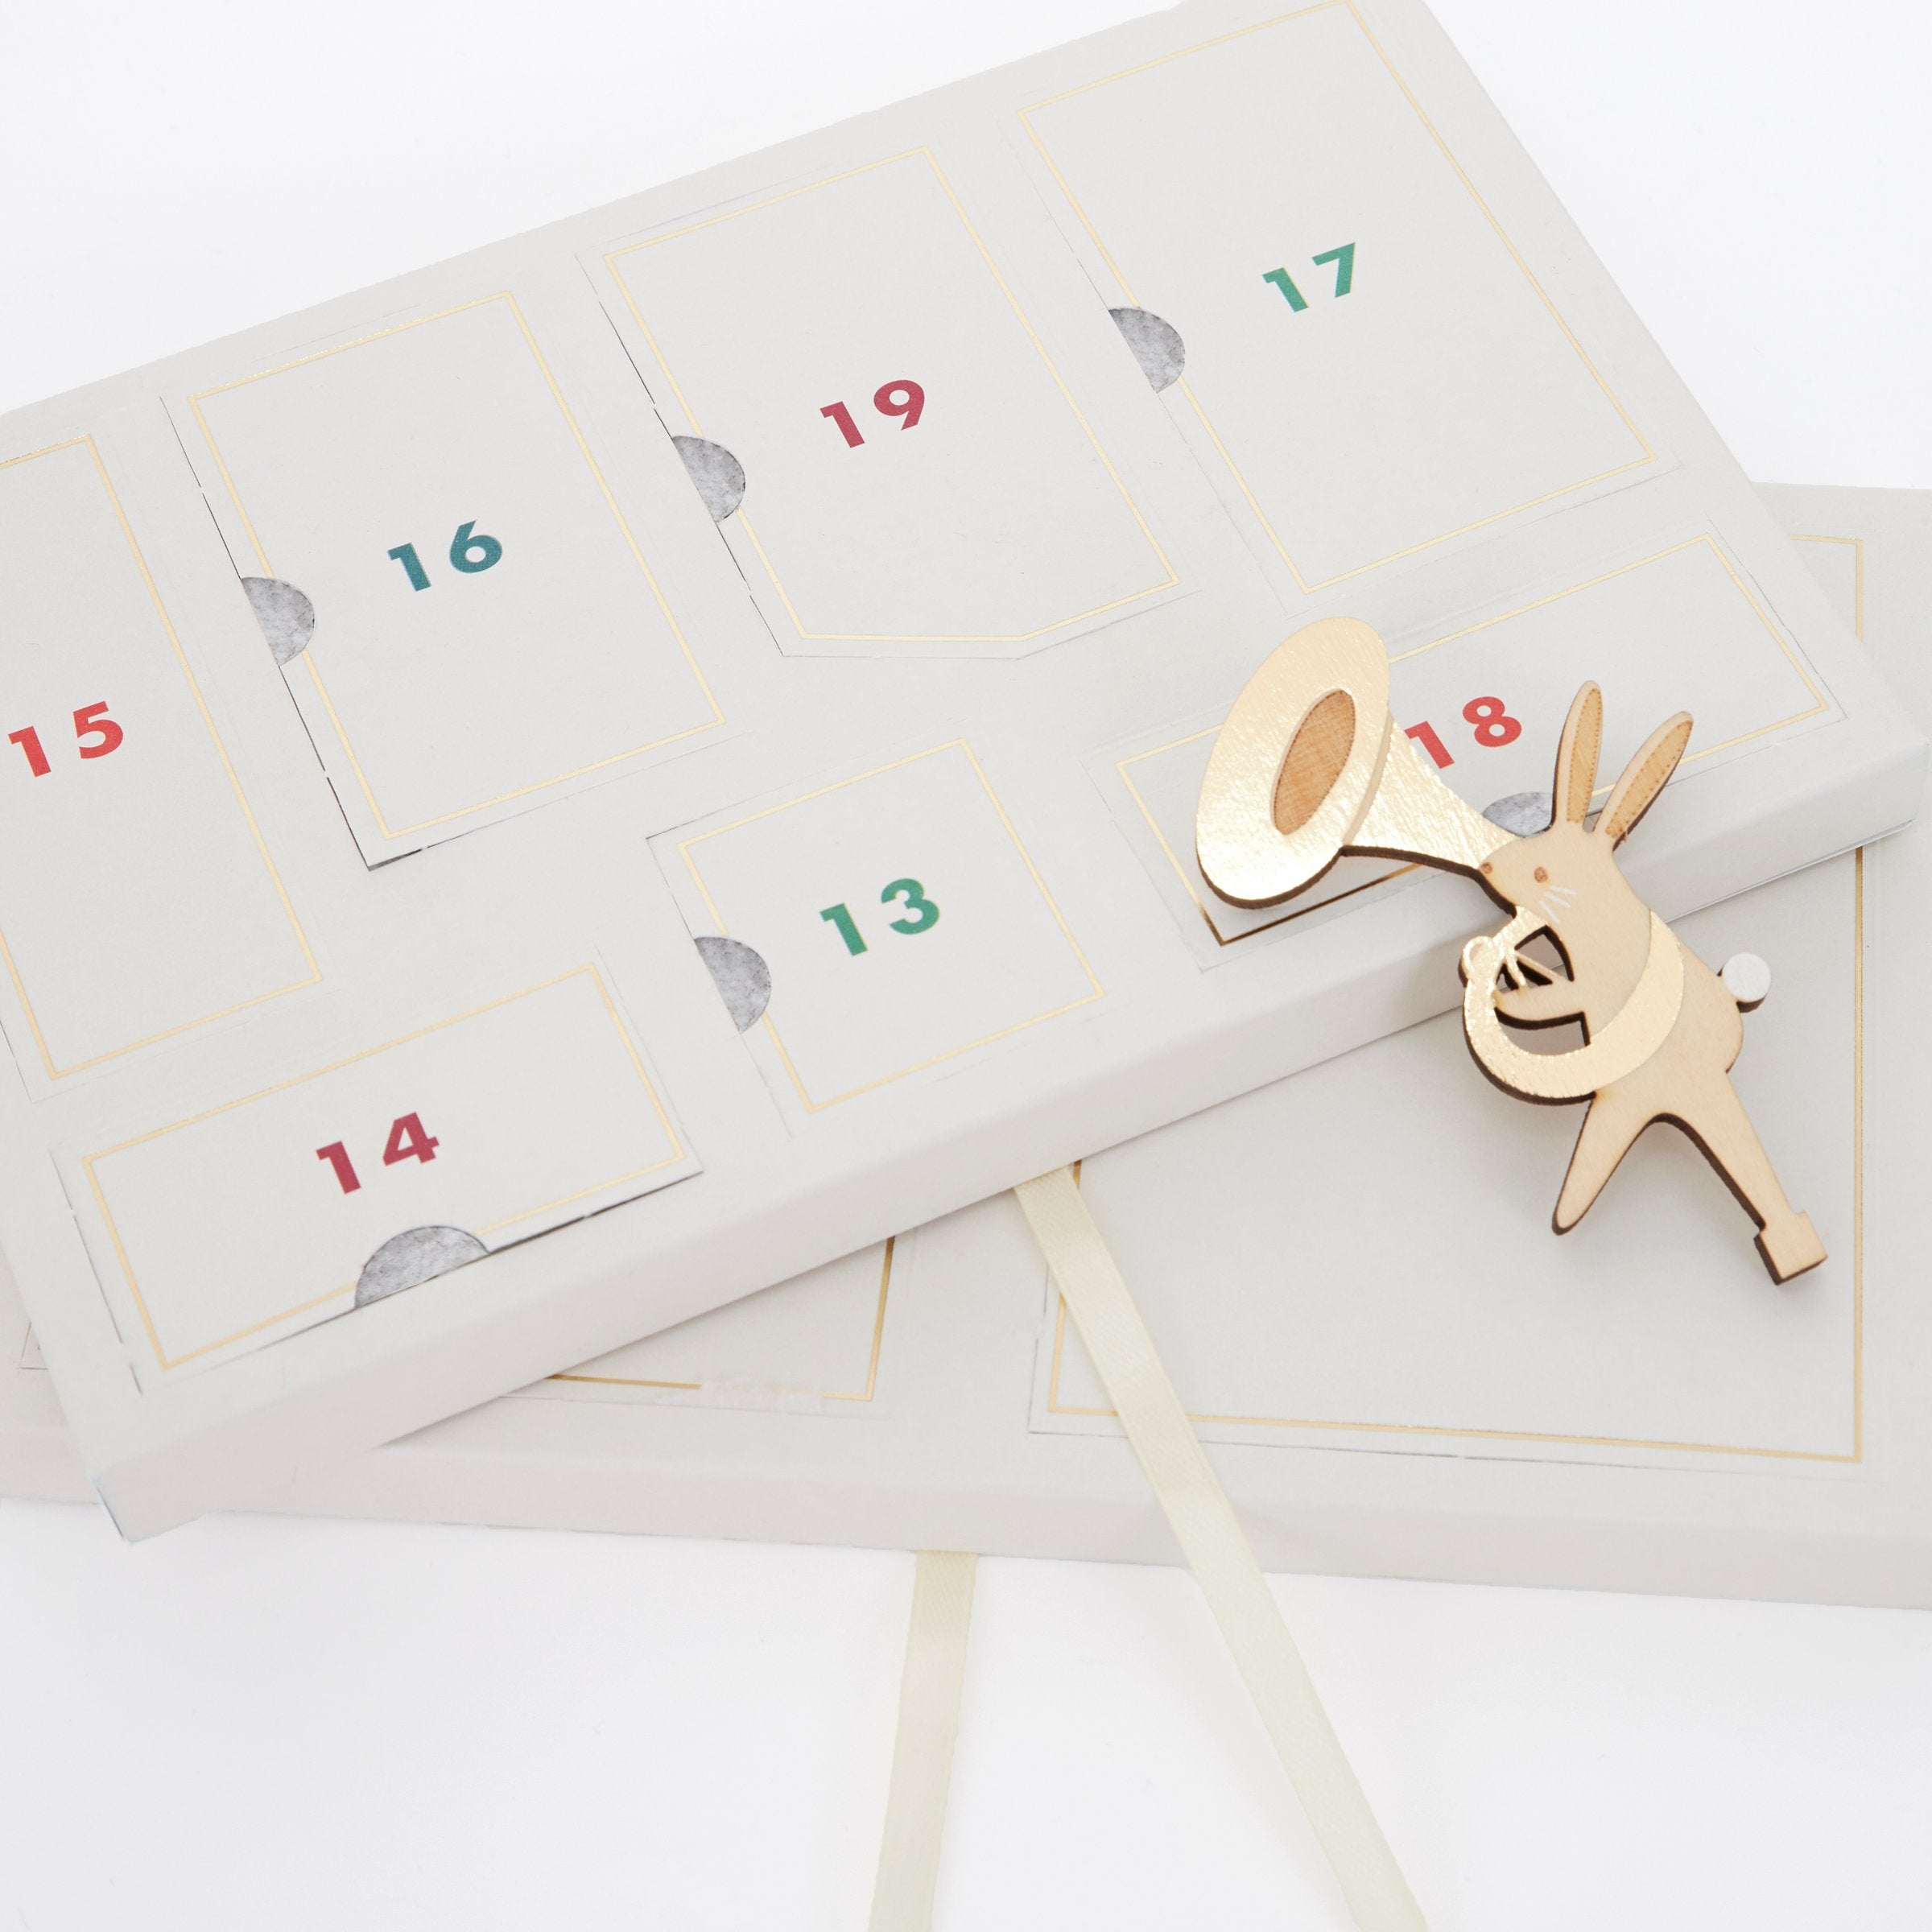 Our kids advent calendar, in a suitcase, features wooden toys for hours of play.